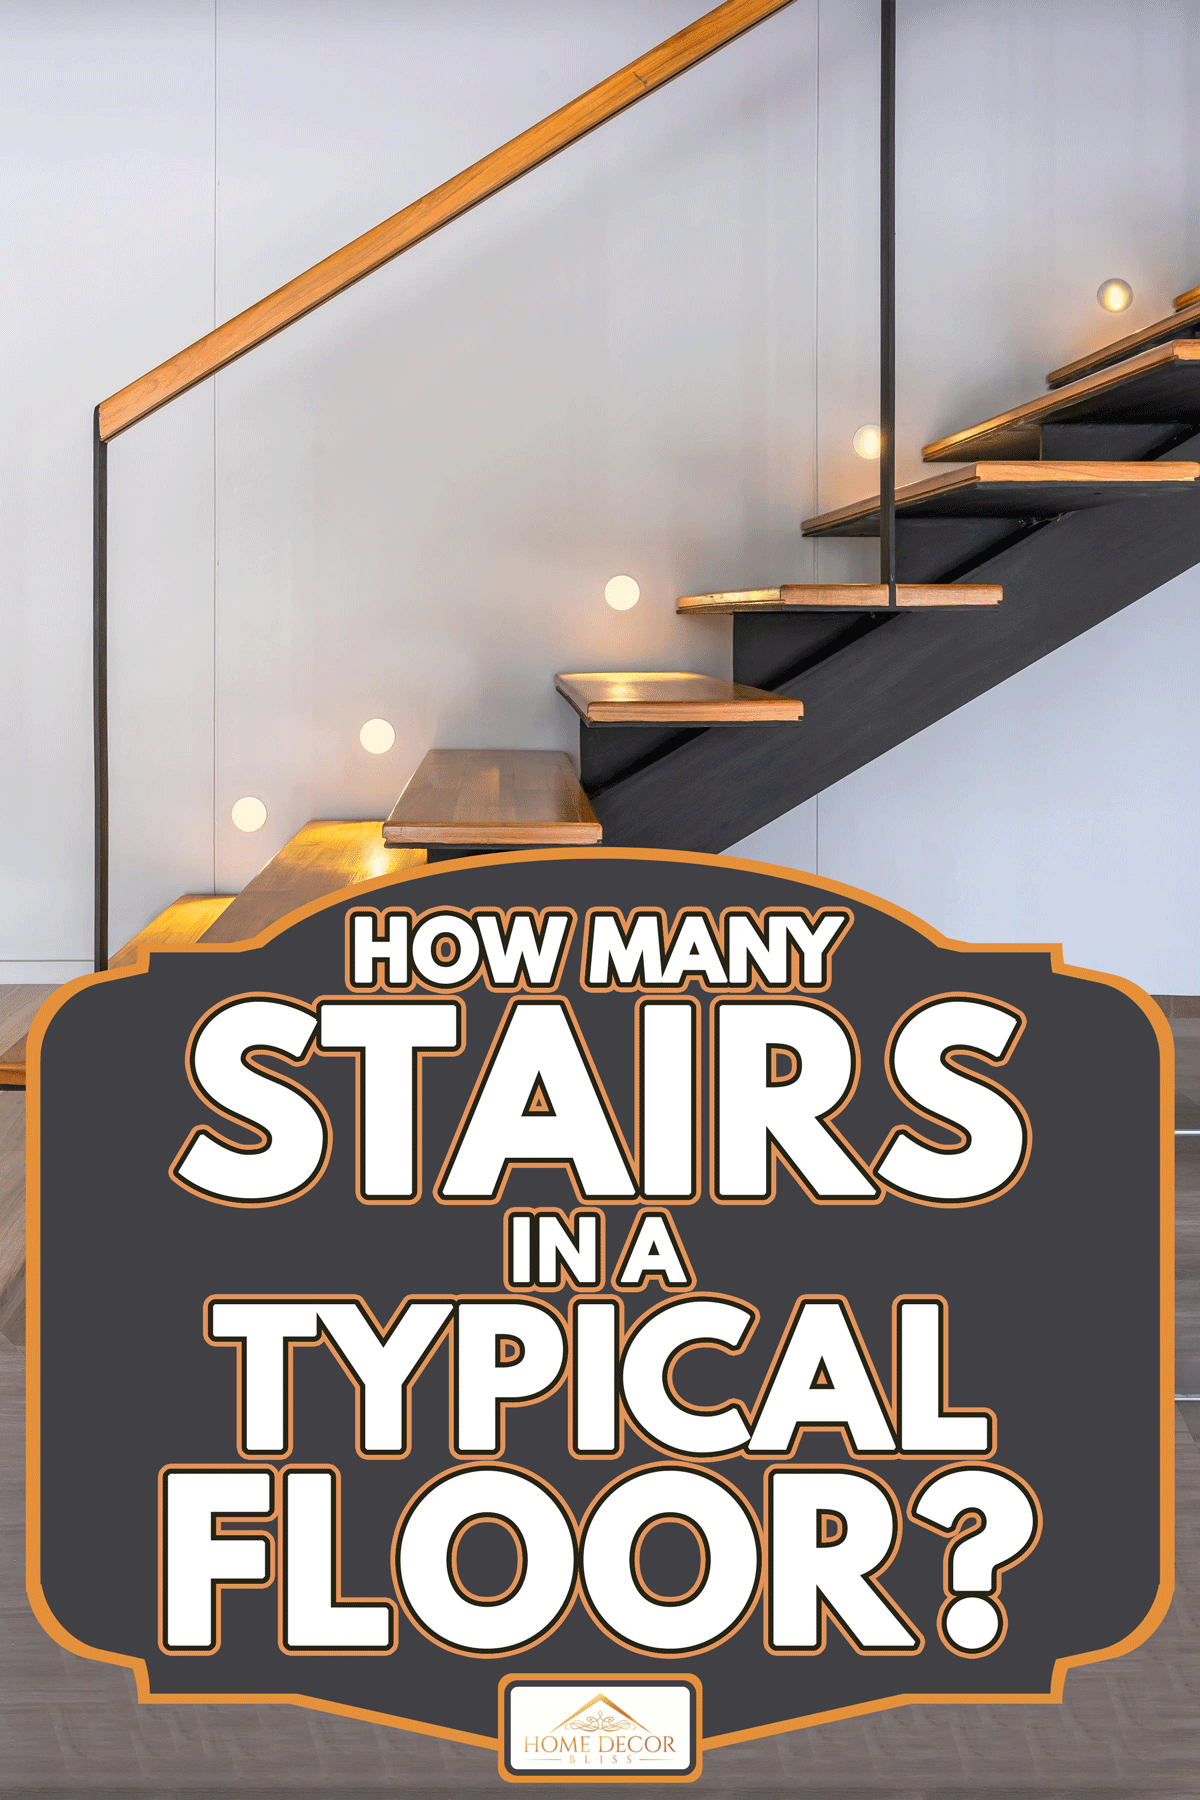 Modern house building stairway, How Many Stairs In A Typical Floor?